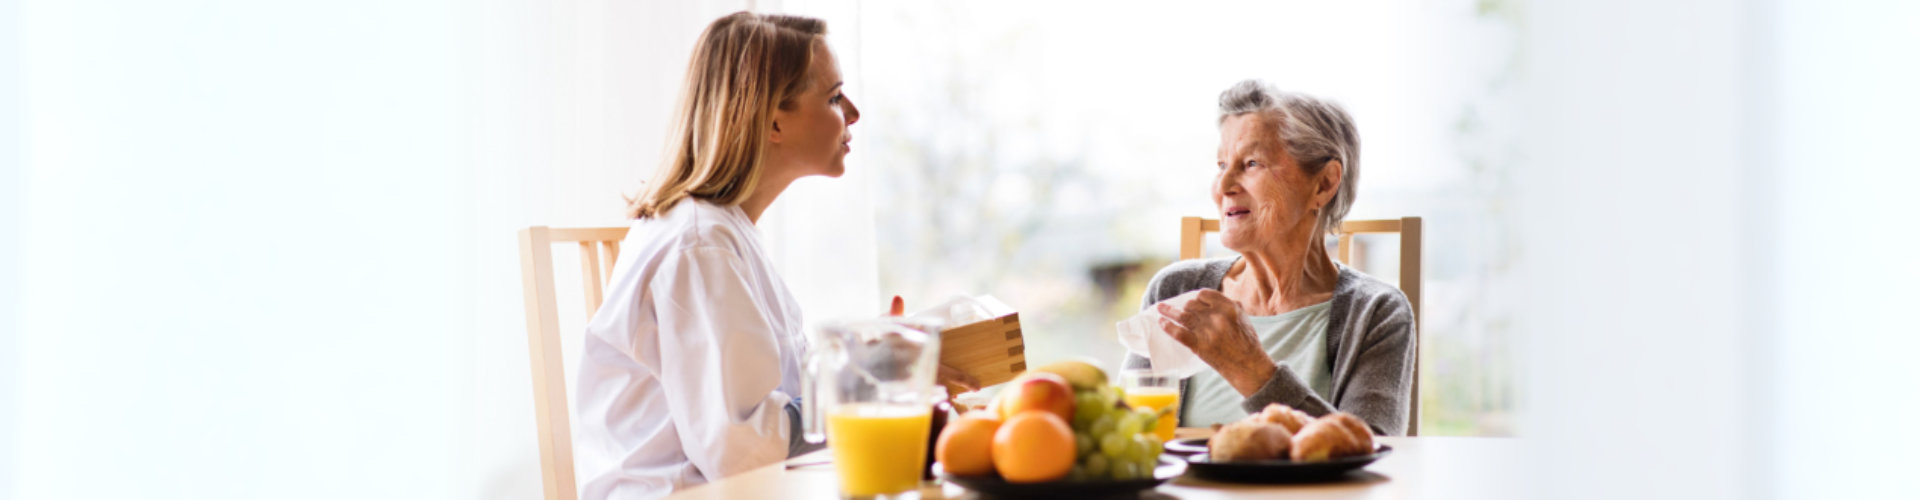 caregiver talking to senior woman with healthy foods in the table